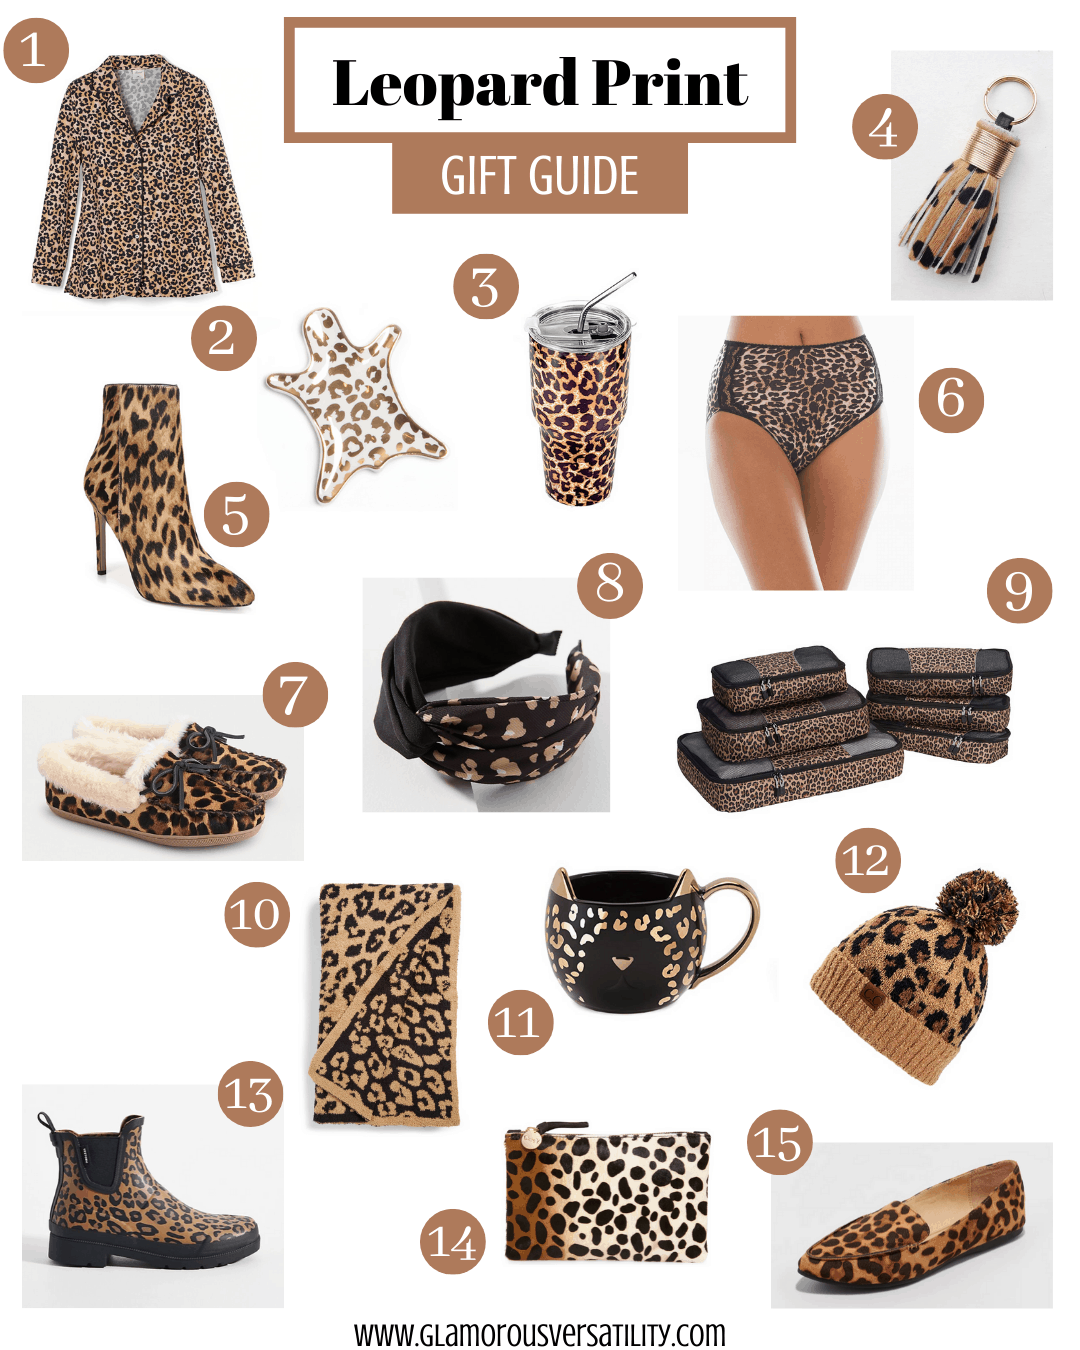 Holiday Gift Guide: the Best Leopard Gifts for the Leopard Print Lover featured by top US life and style blog, Glamorous Versatility